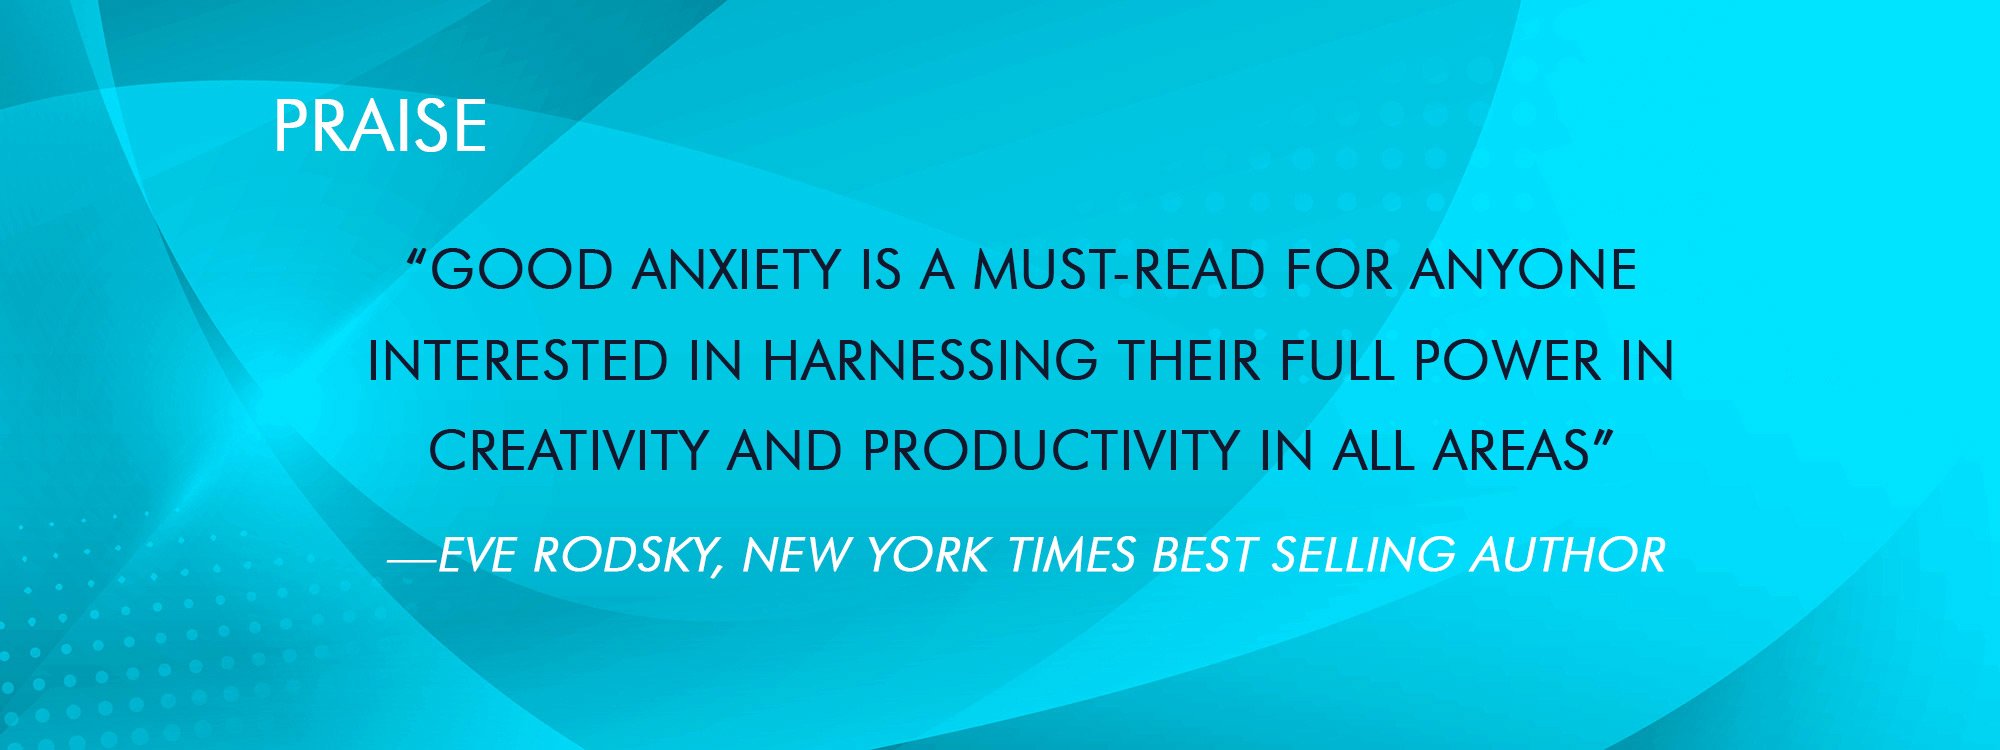 Good Anxiety: Harnessing the Power of the Most Misunderstood Emotion [Book]